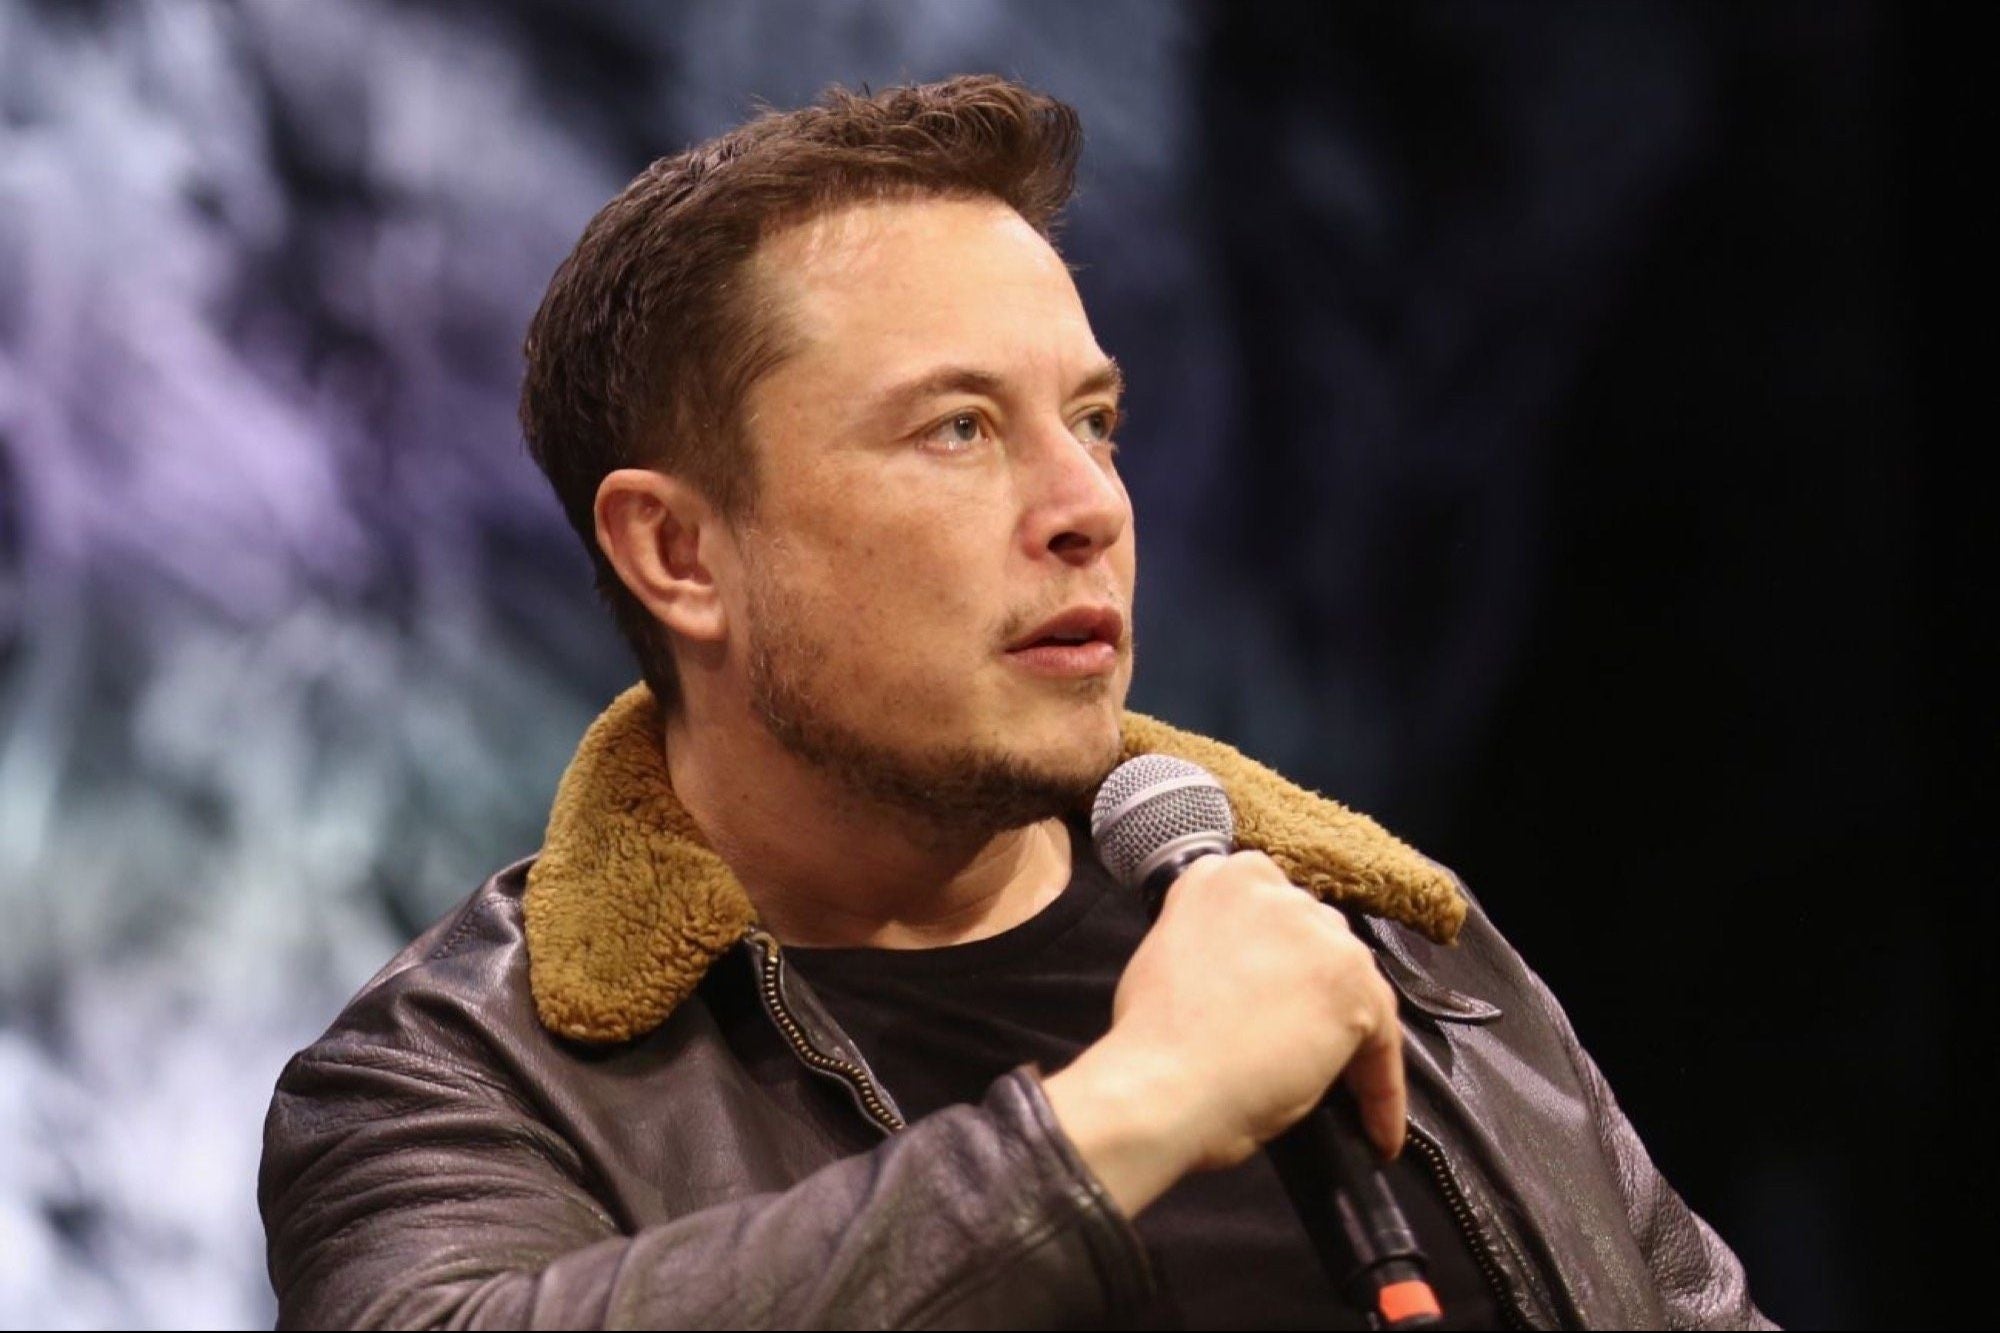 Elon Musk is responding to a request from a tweeter who sent him the same message 154 times